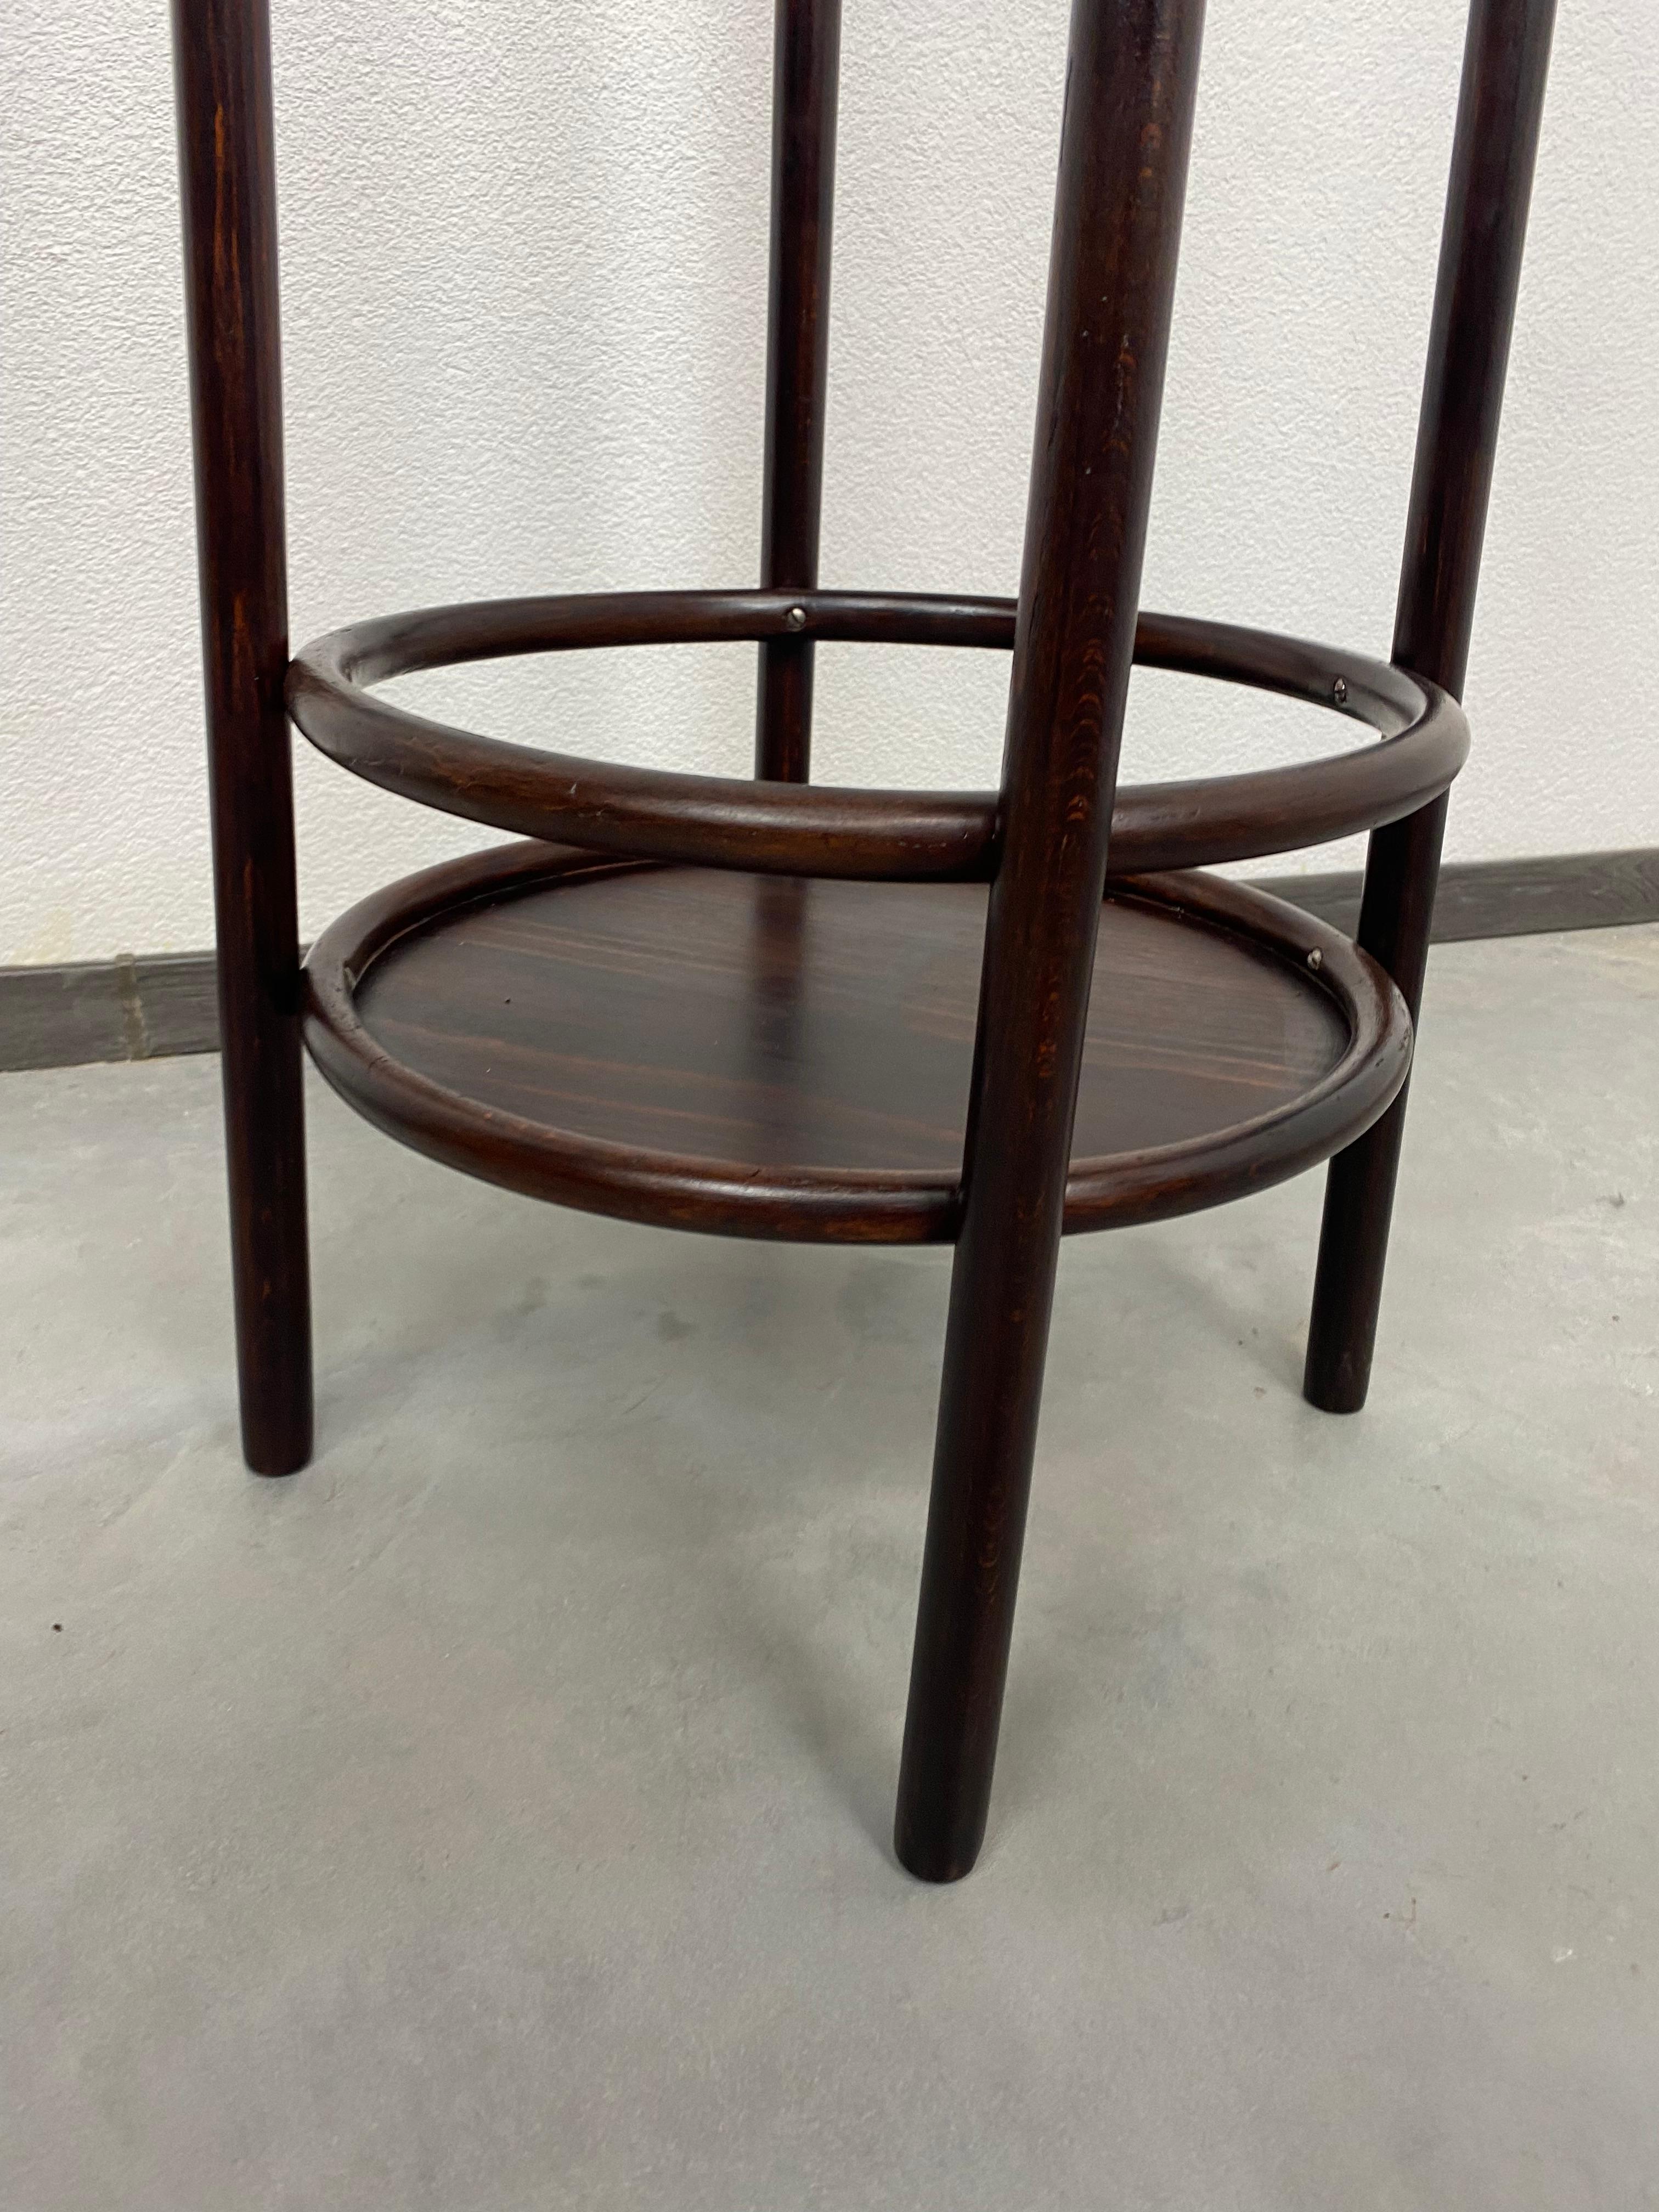 Bentwood Plant Stands by Thonet In Excellent Condition For Sale In Banská Štiavnica, SK